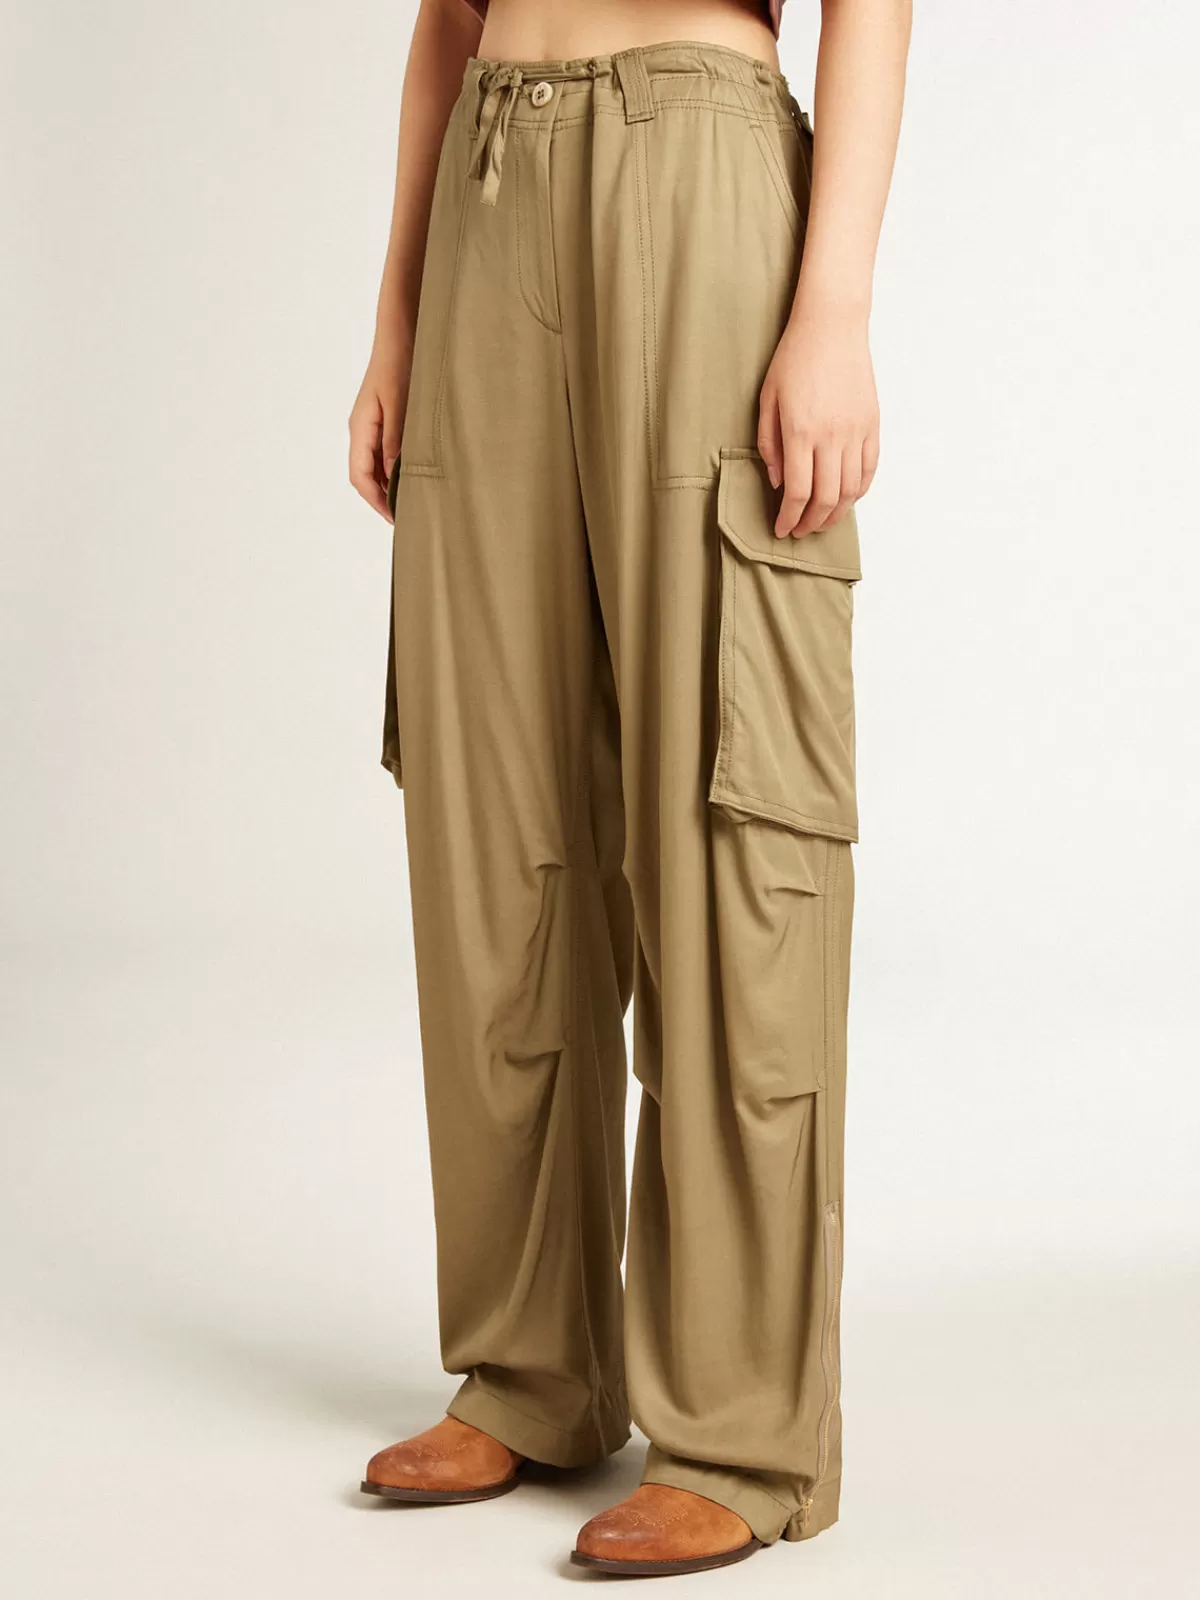 Golden Goose Women’s -colored viscose cargo pants olive New